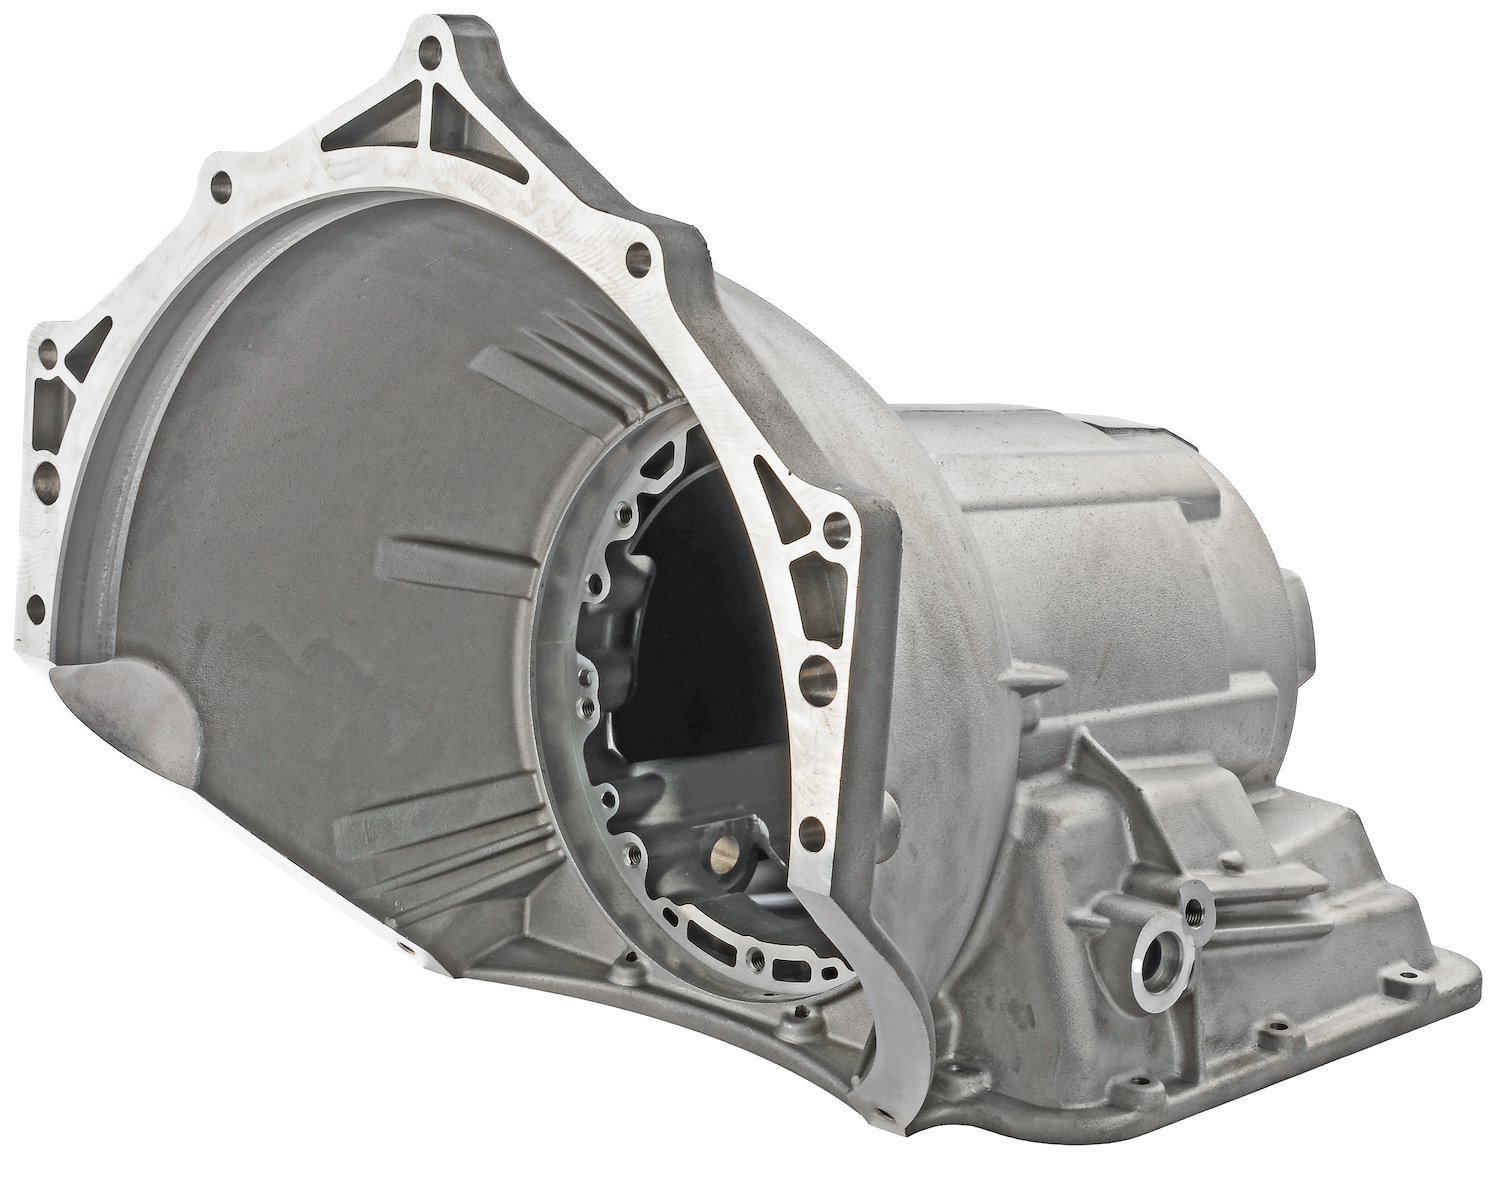 Powerglide Transmission Case with SFI 30.1 Liner 1-Piece Casting with Bell-Housing